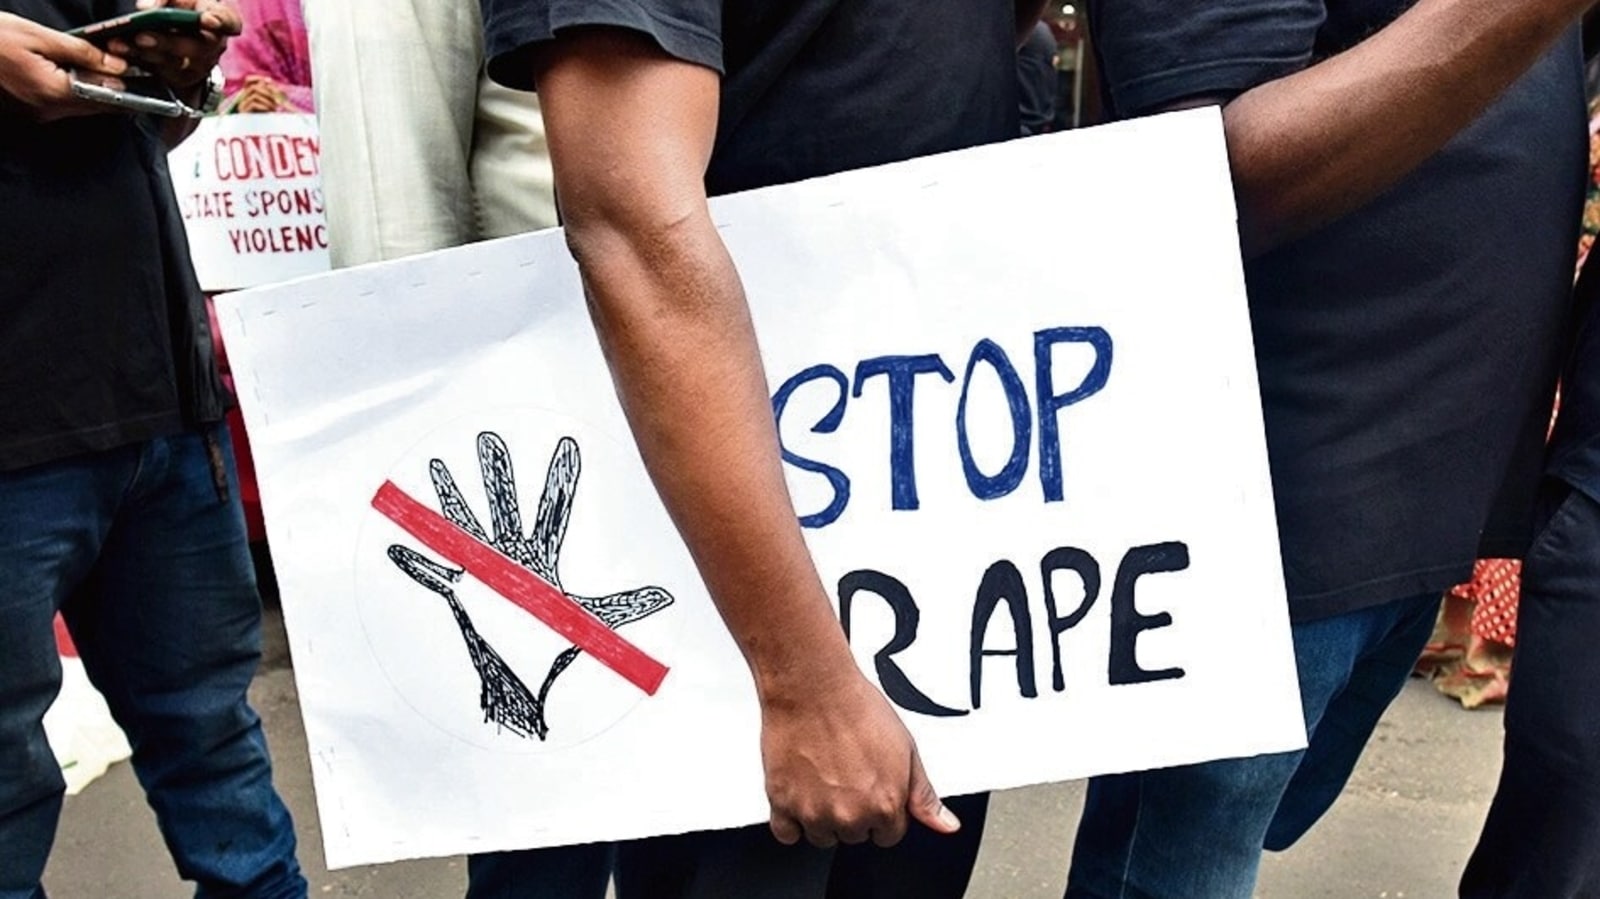 Porn Hot Biker Raping Young Woman - Daily brief: Teenager rapes minor girl after watching porn, strangles her |  Latest News India - Hindustan Times